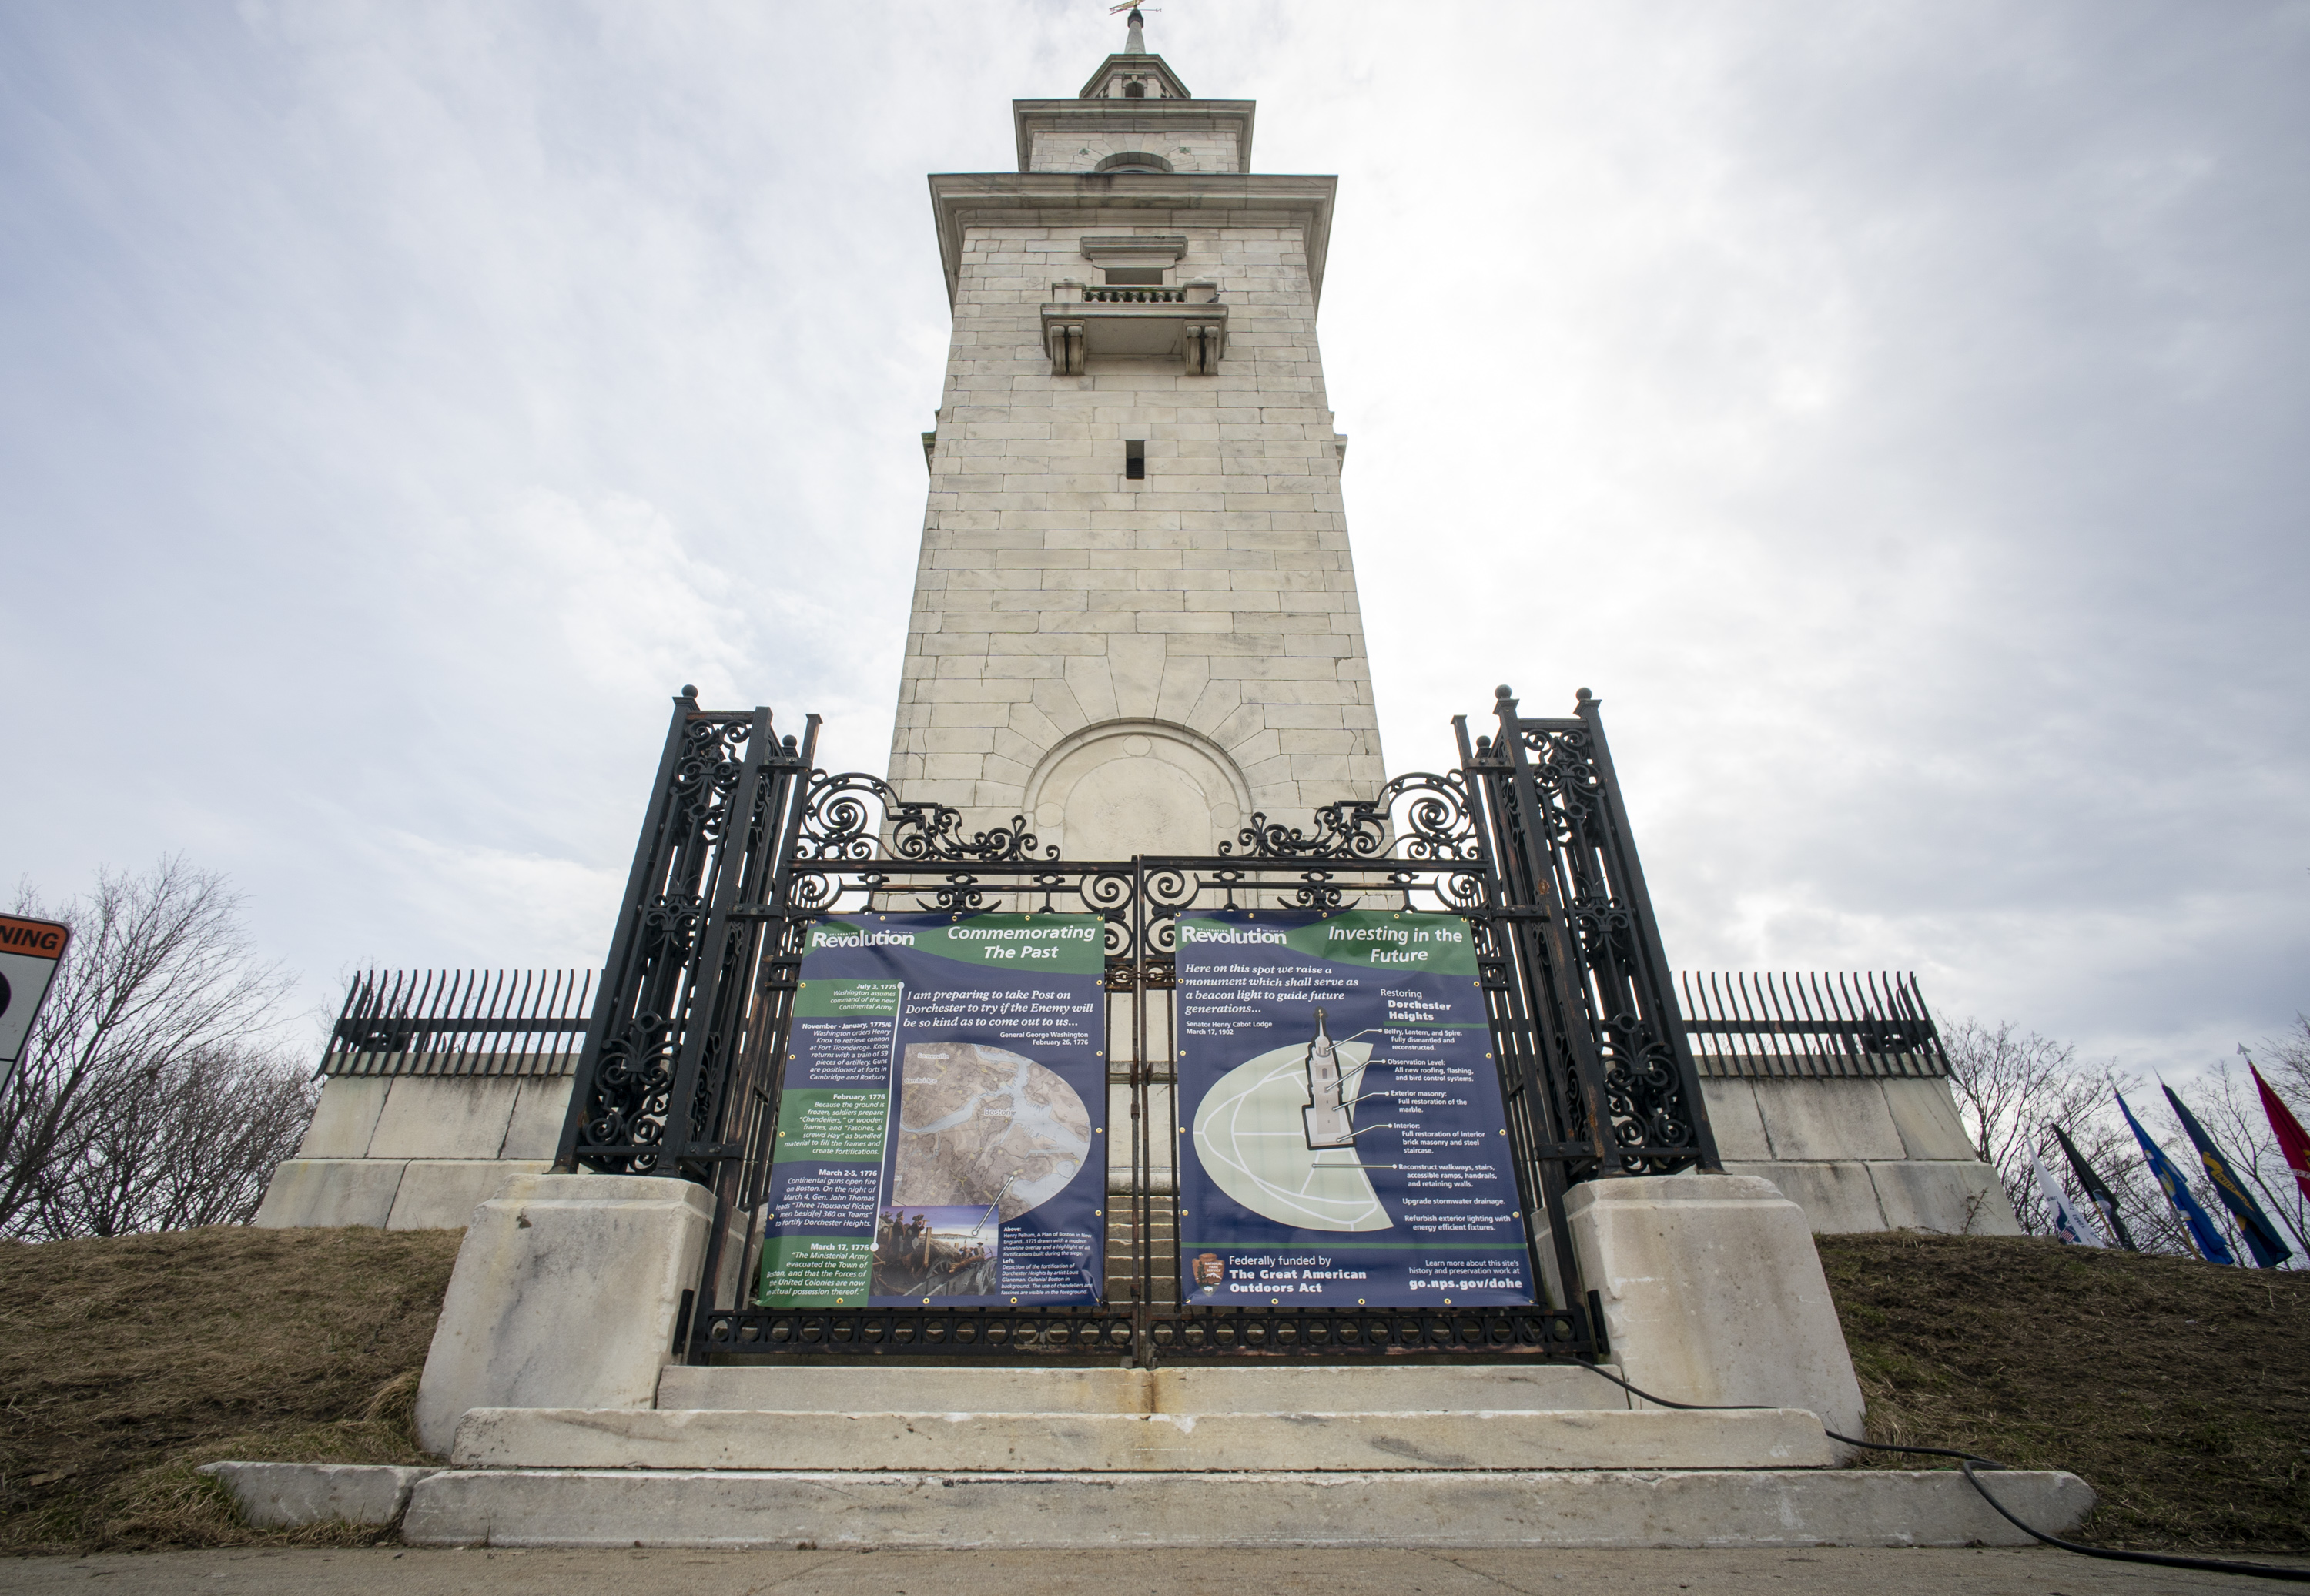 Dorchester Heights Monument with gates closed and vinyl exhibit on the history and restoration project on doors.